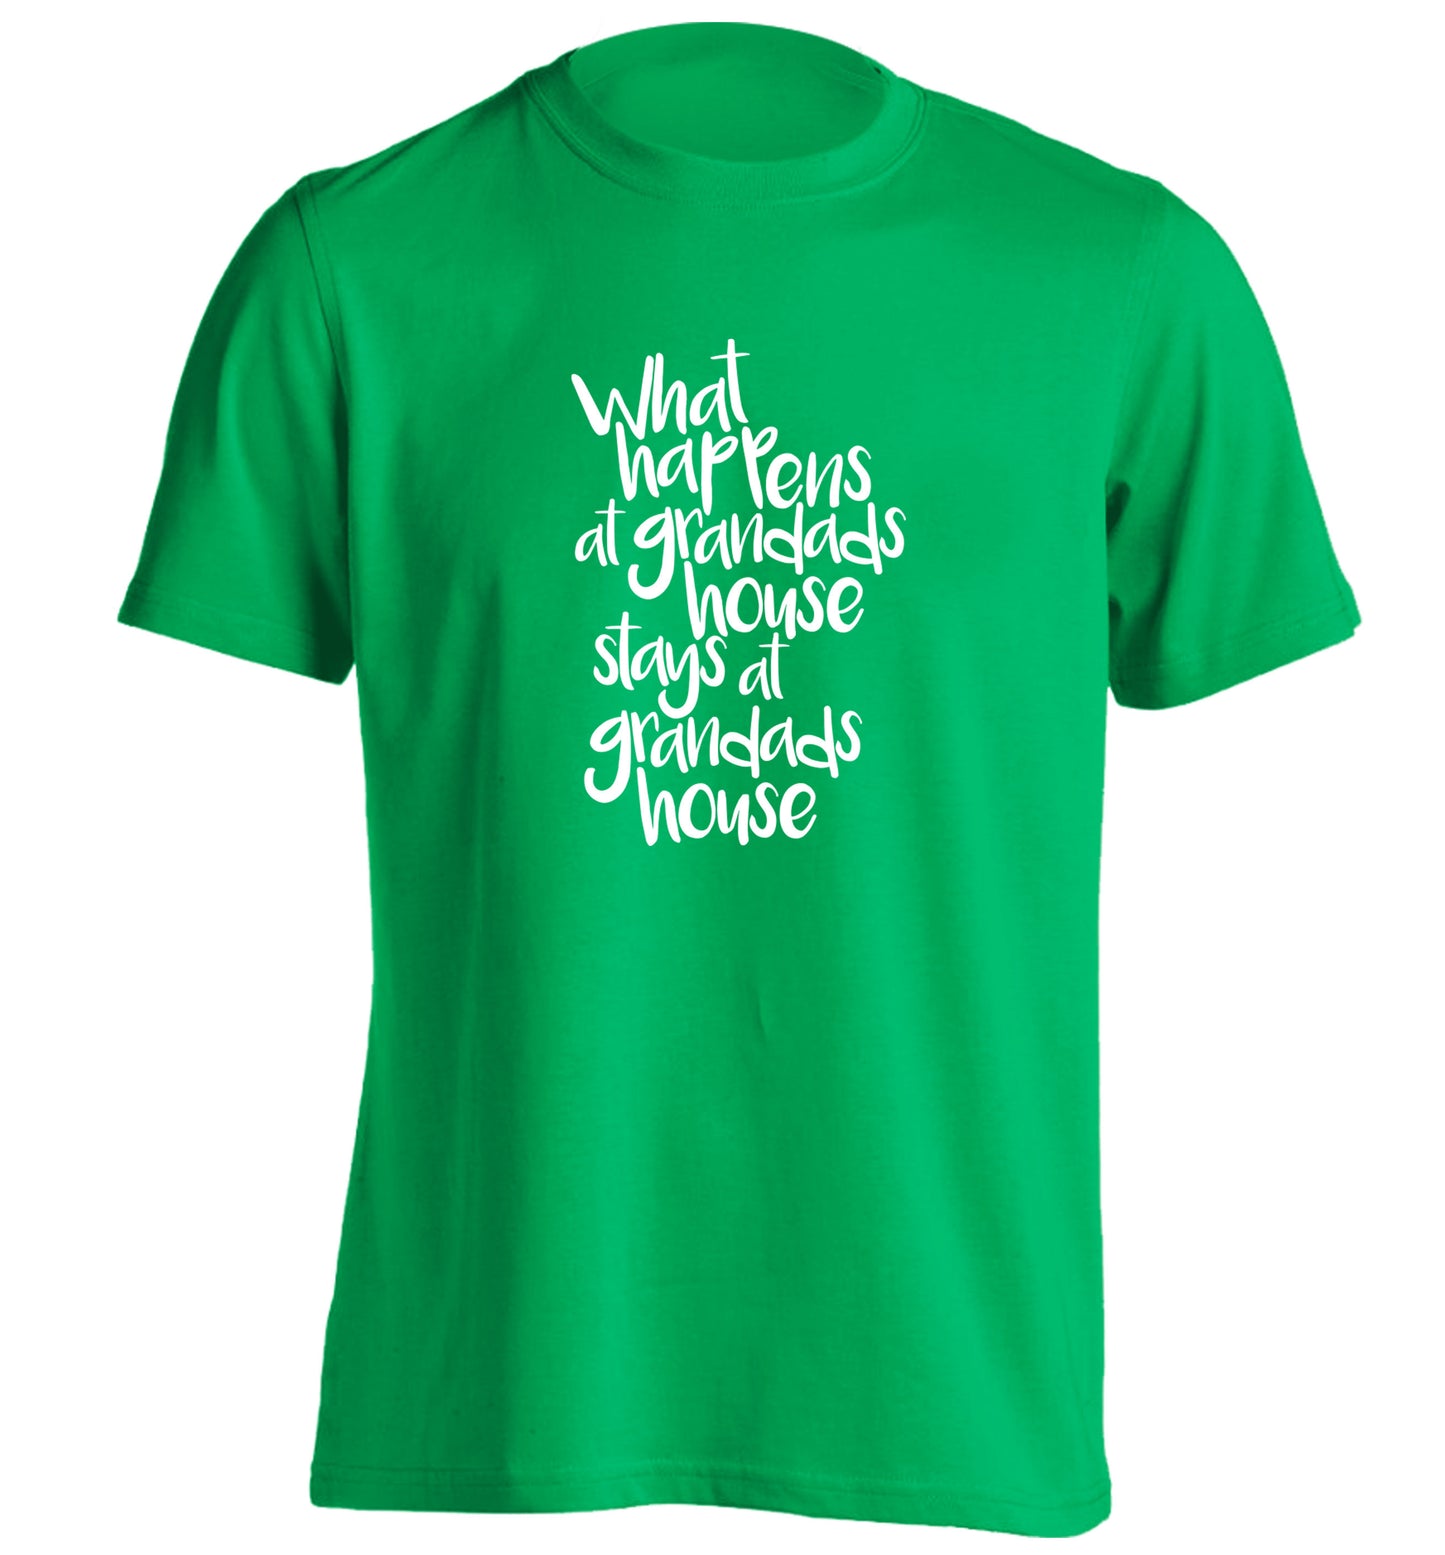 What happens at grandads house stays at grandads house adults unisex green Tshirt 2XL